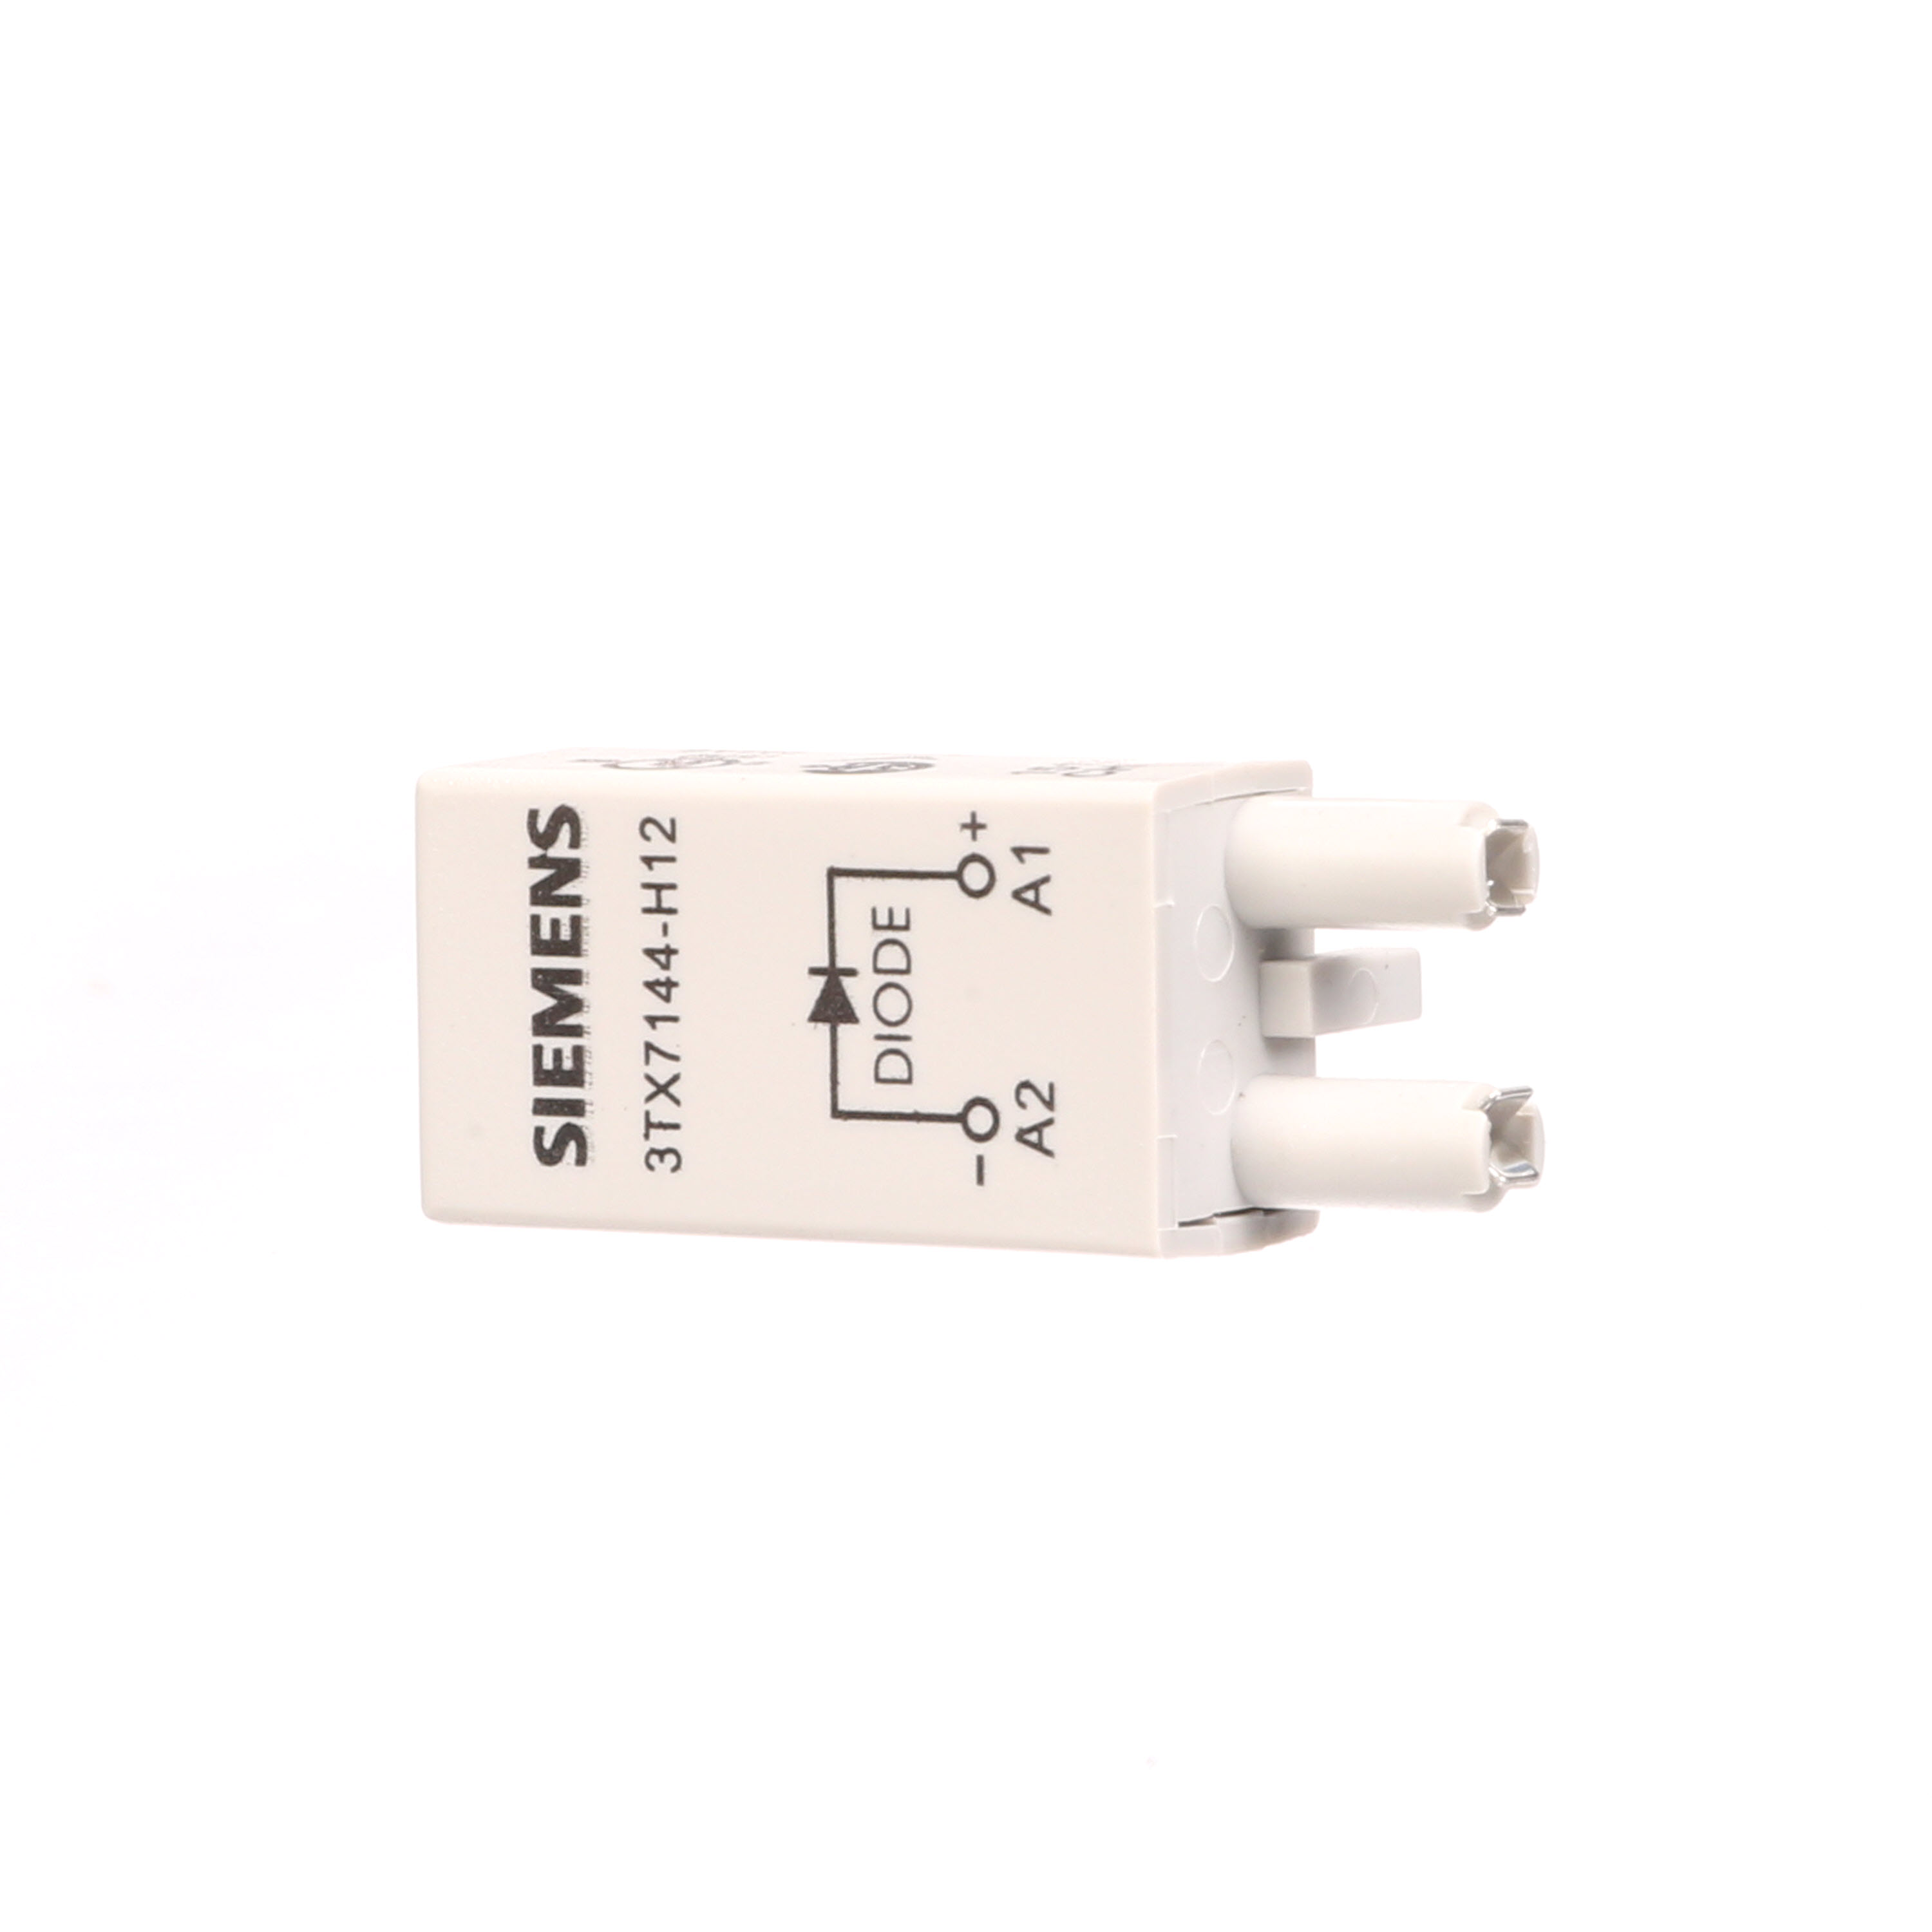 Siemens 3TX7144-H12 Protection Diode